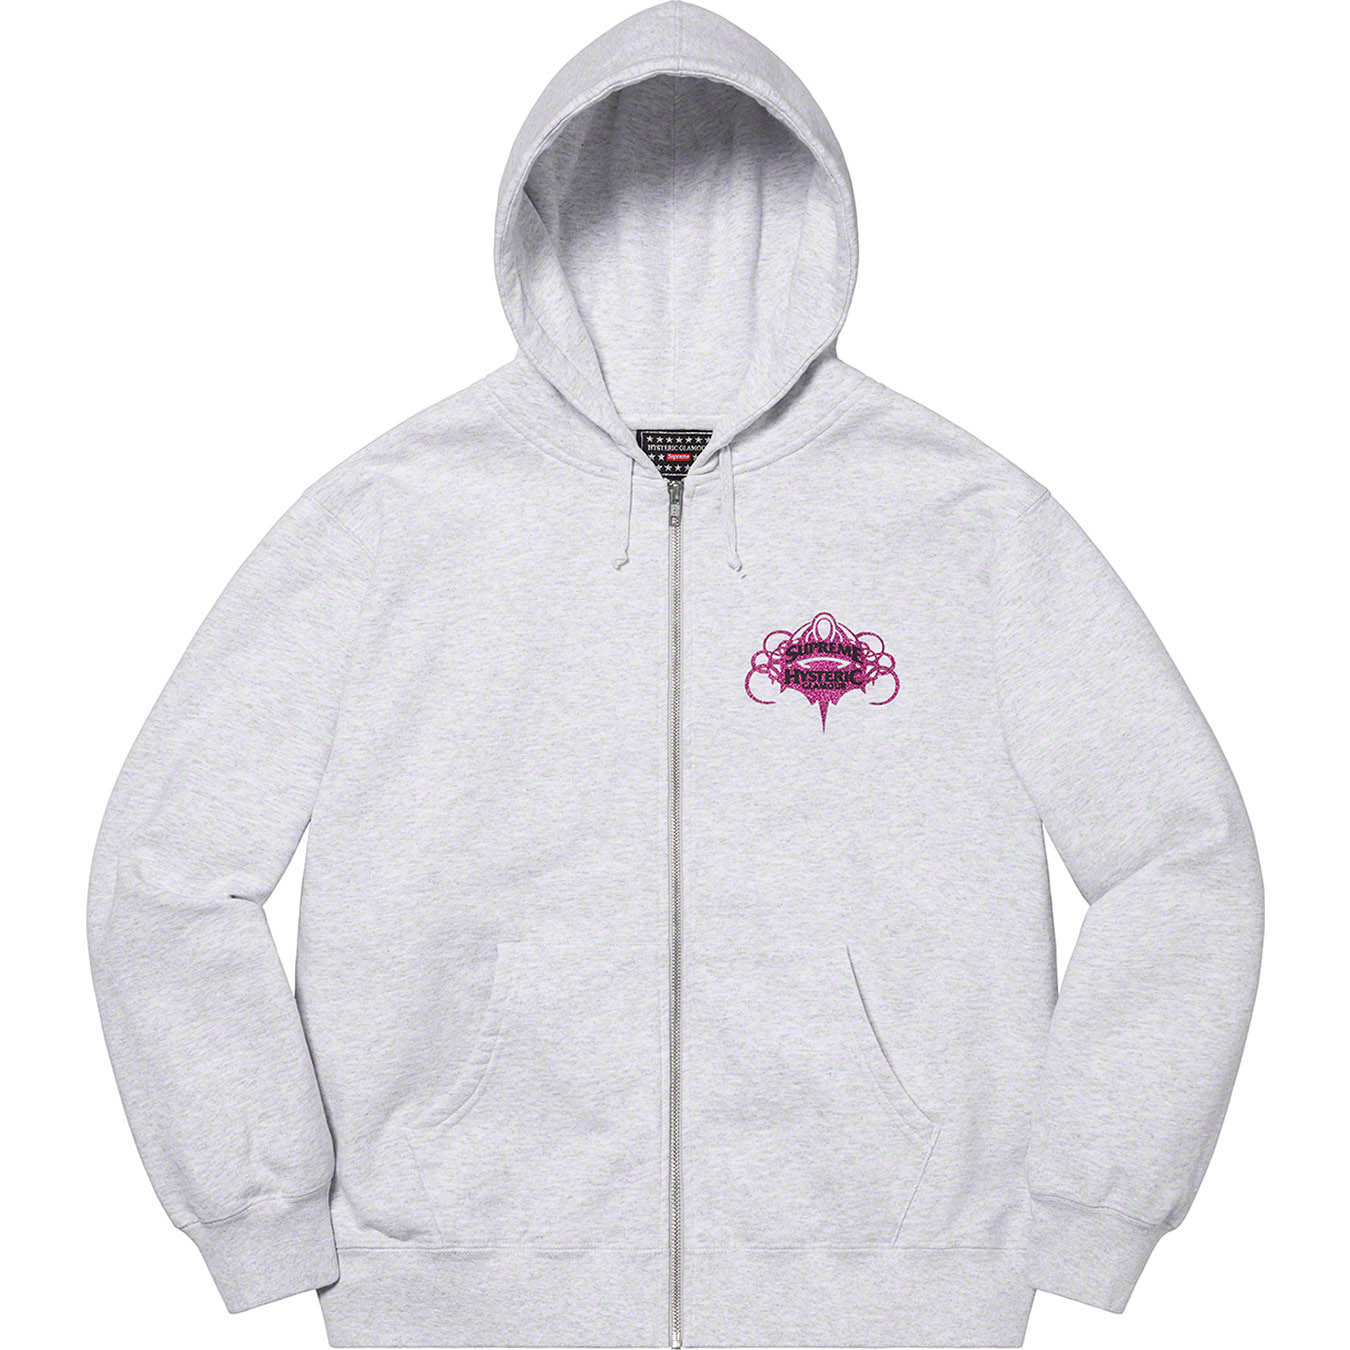 Supreme®/HYSTERIC GLAMOUR Zip Up Hooded Sweatshirt | Supreme 21ss